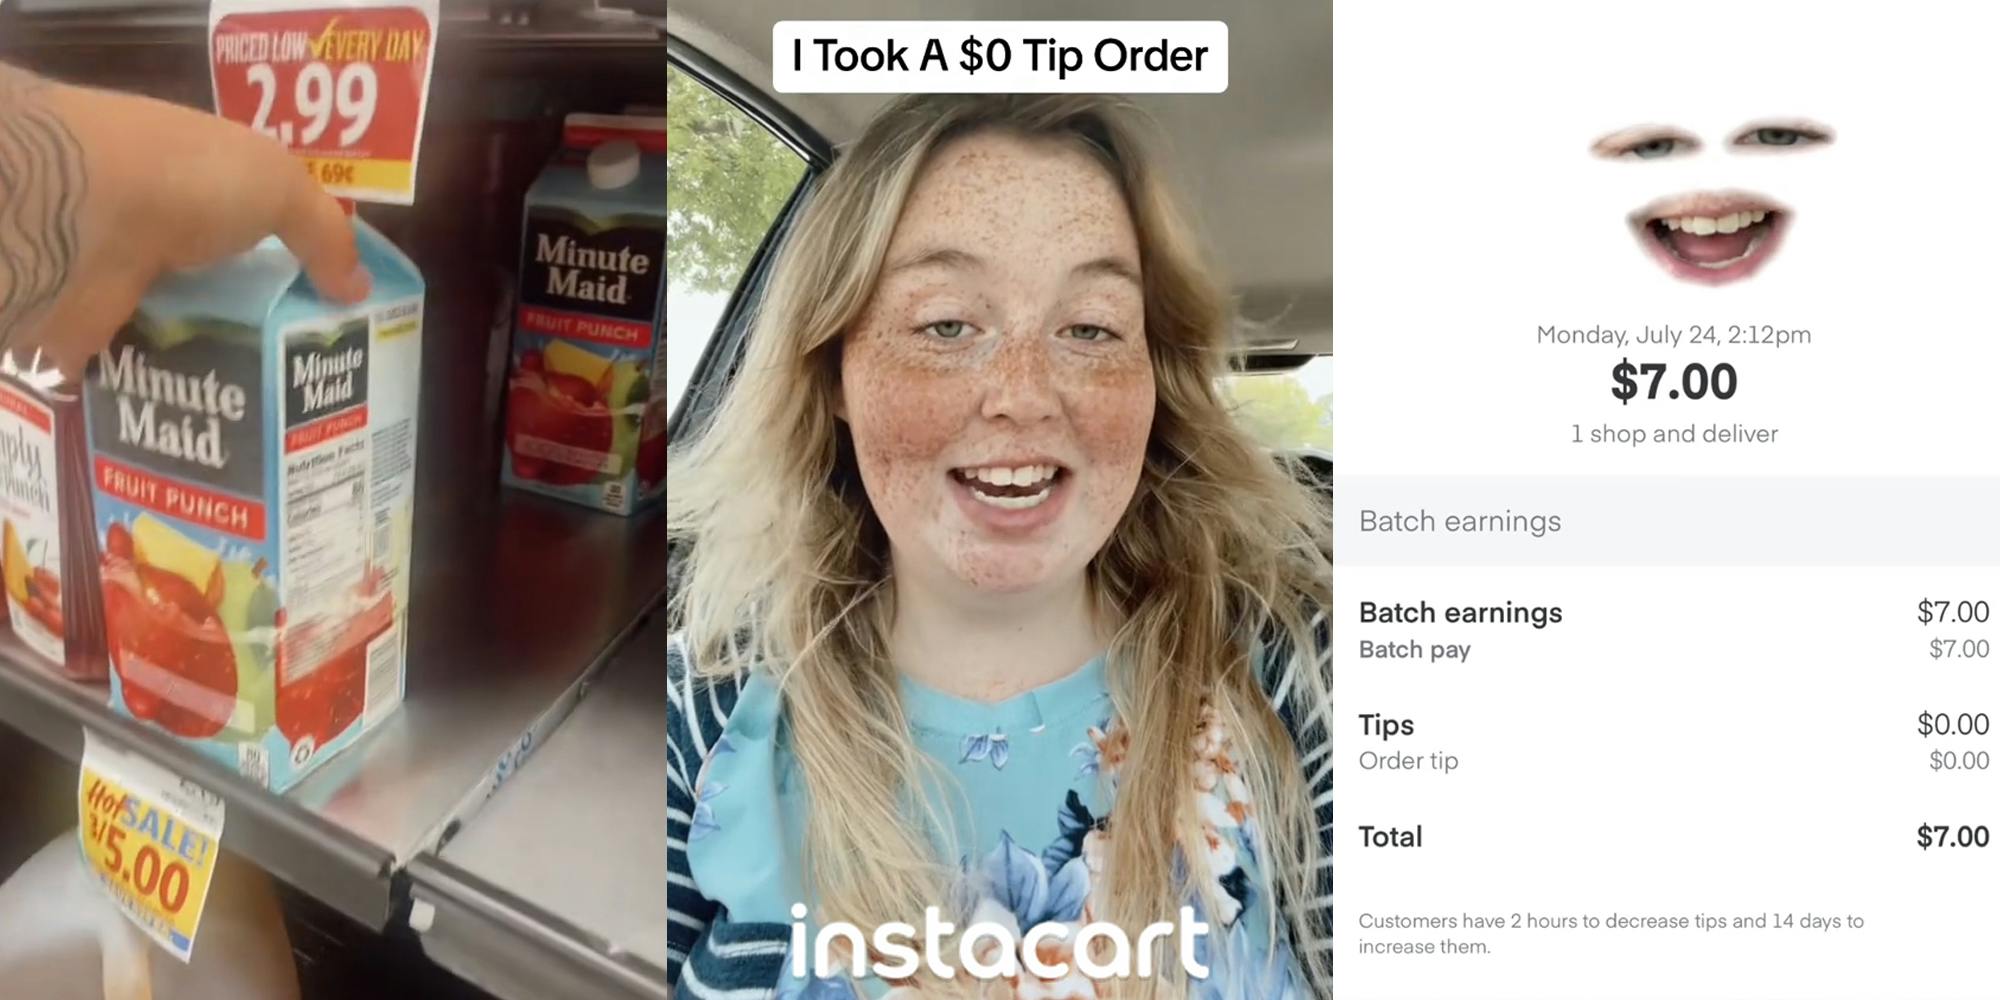 Instacart shopper grabbing Minute Maid fruit punch from store fridge (l) Instacart shopper speaking in car with caption "I Took A $0 Tip Order" with Instacart logo at bottom (c) Instacart shopper eye filter over Instacart $0 tip order (r)